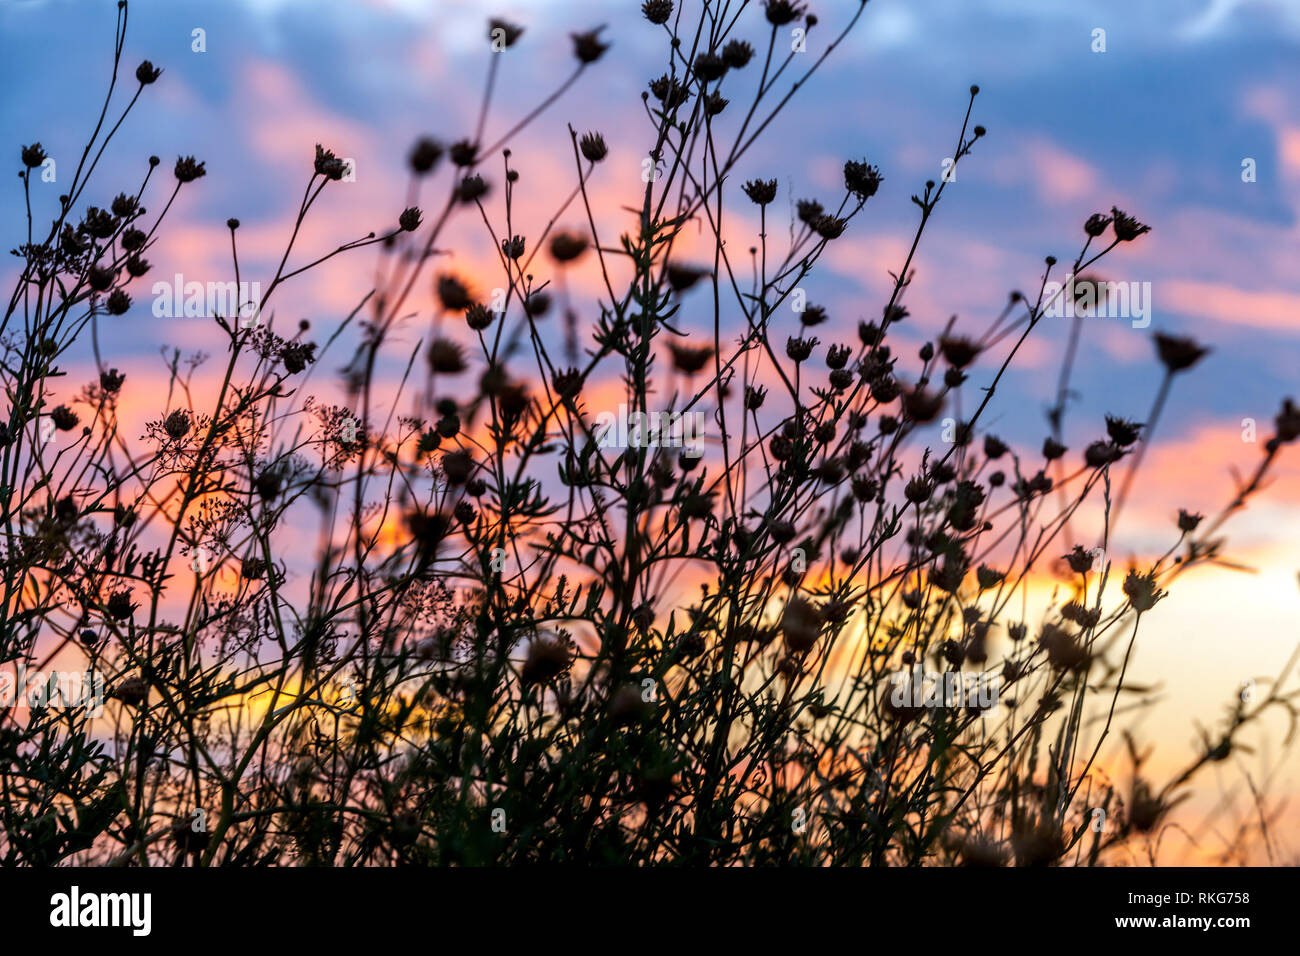 Silhouette of meadow flowers at sunset with dramatic clouds in the background Stock Photo